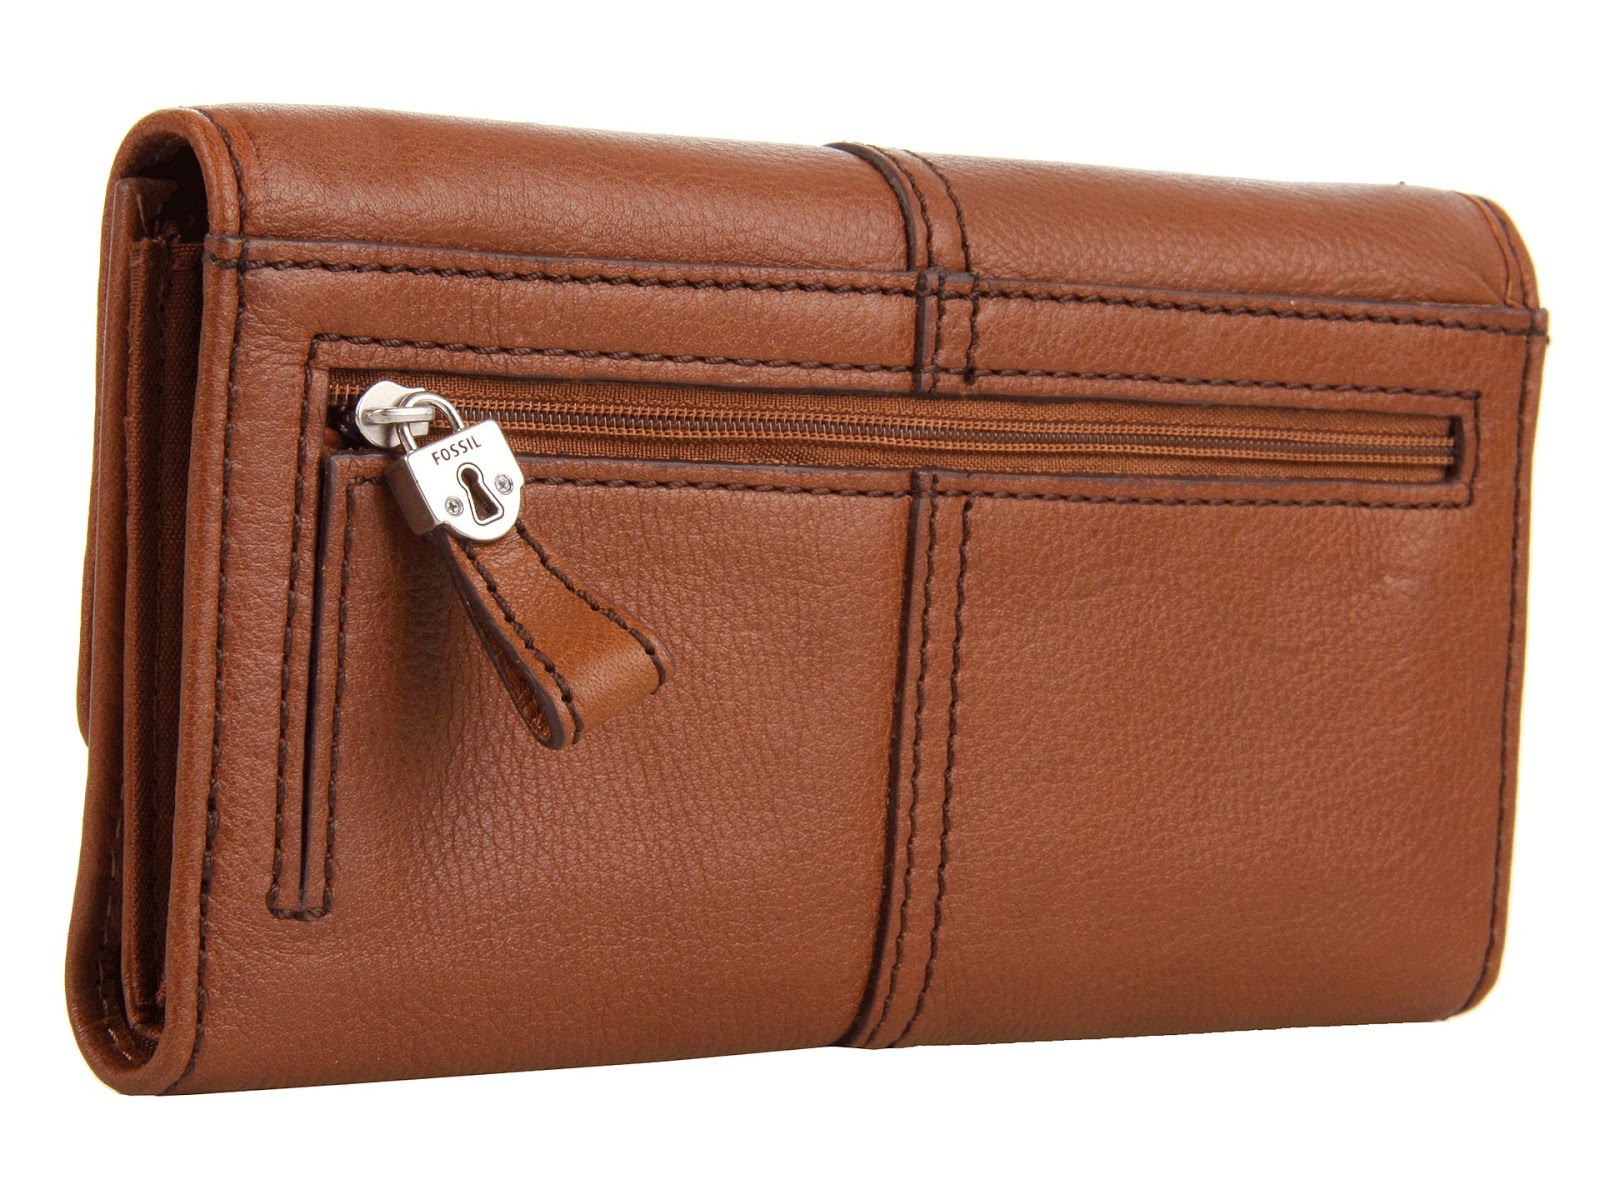 USA Boutique: Fossil Marlow Flap Clutch Wallet - Chestnut